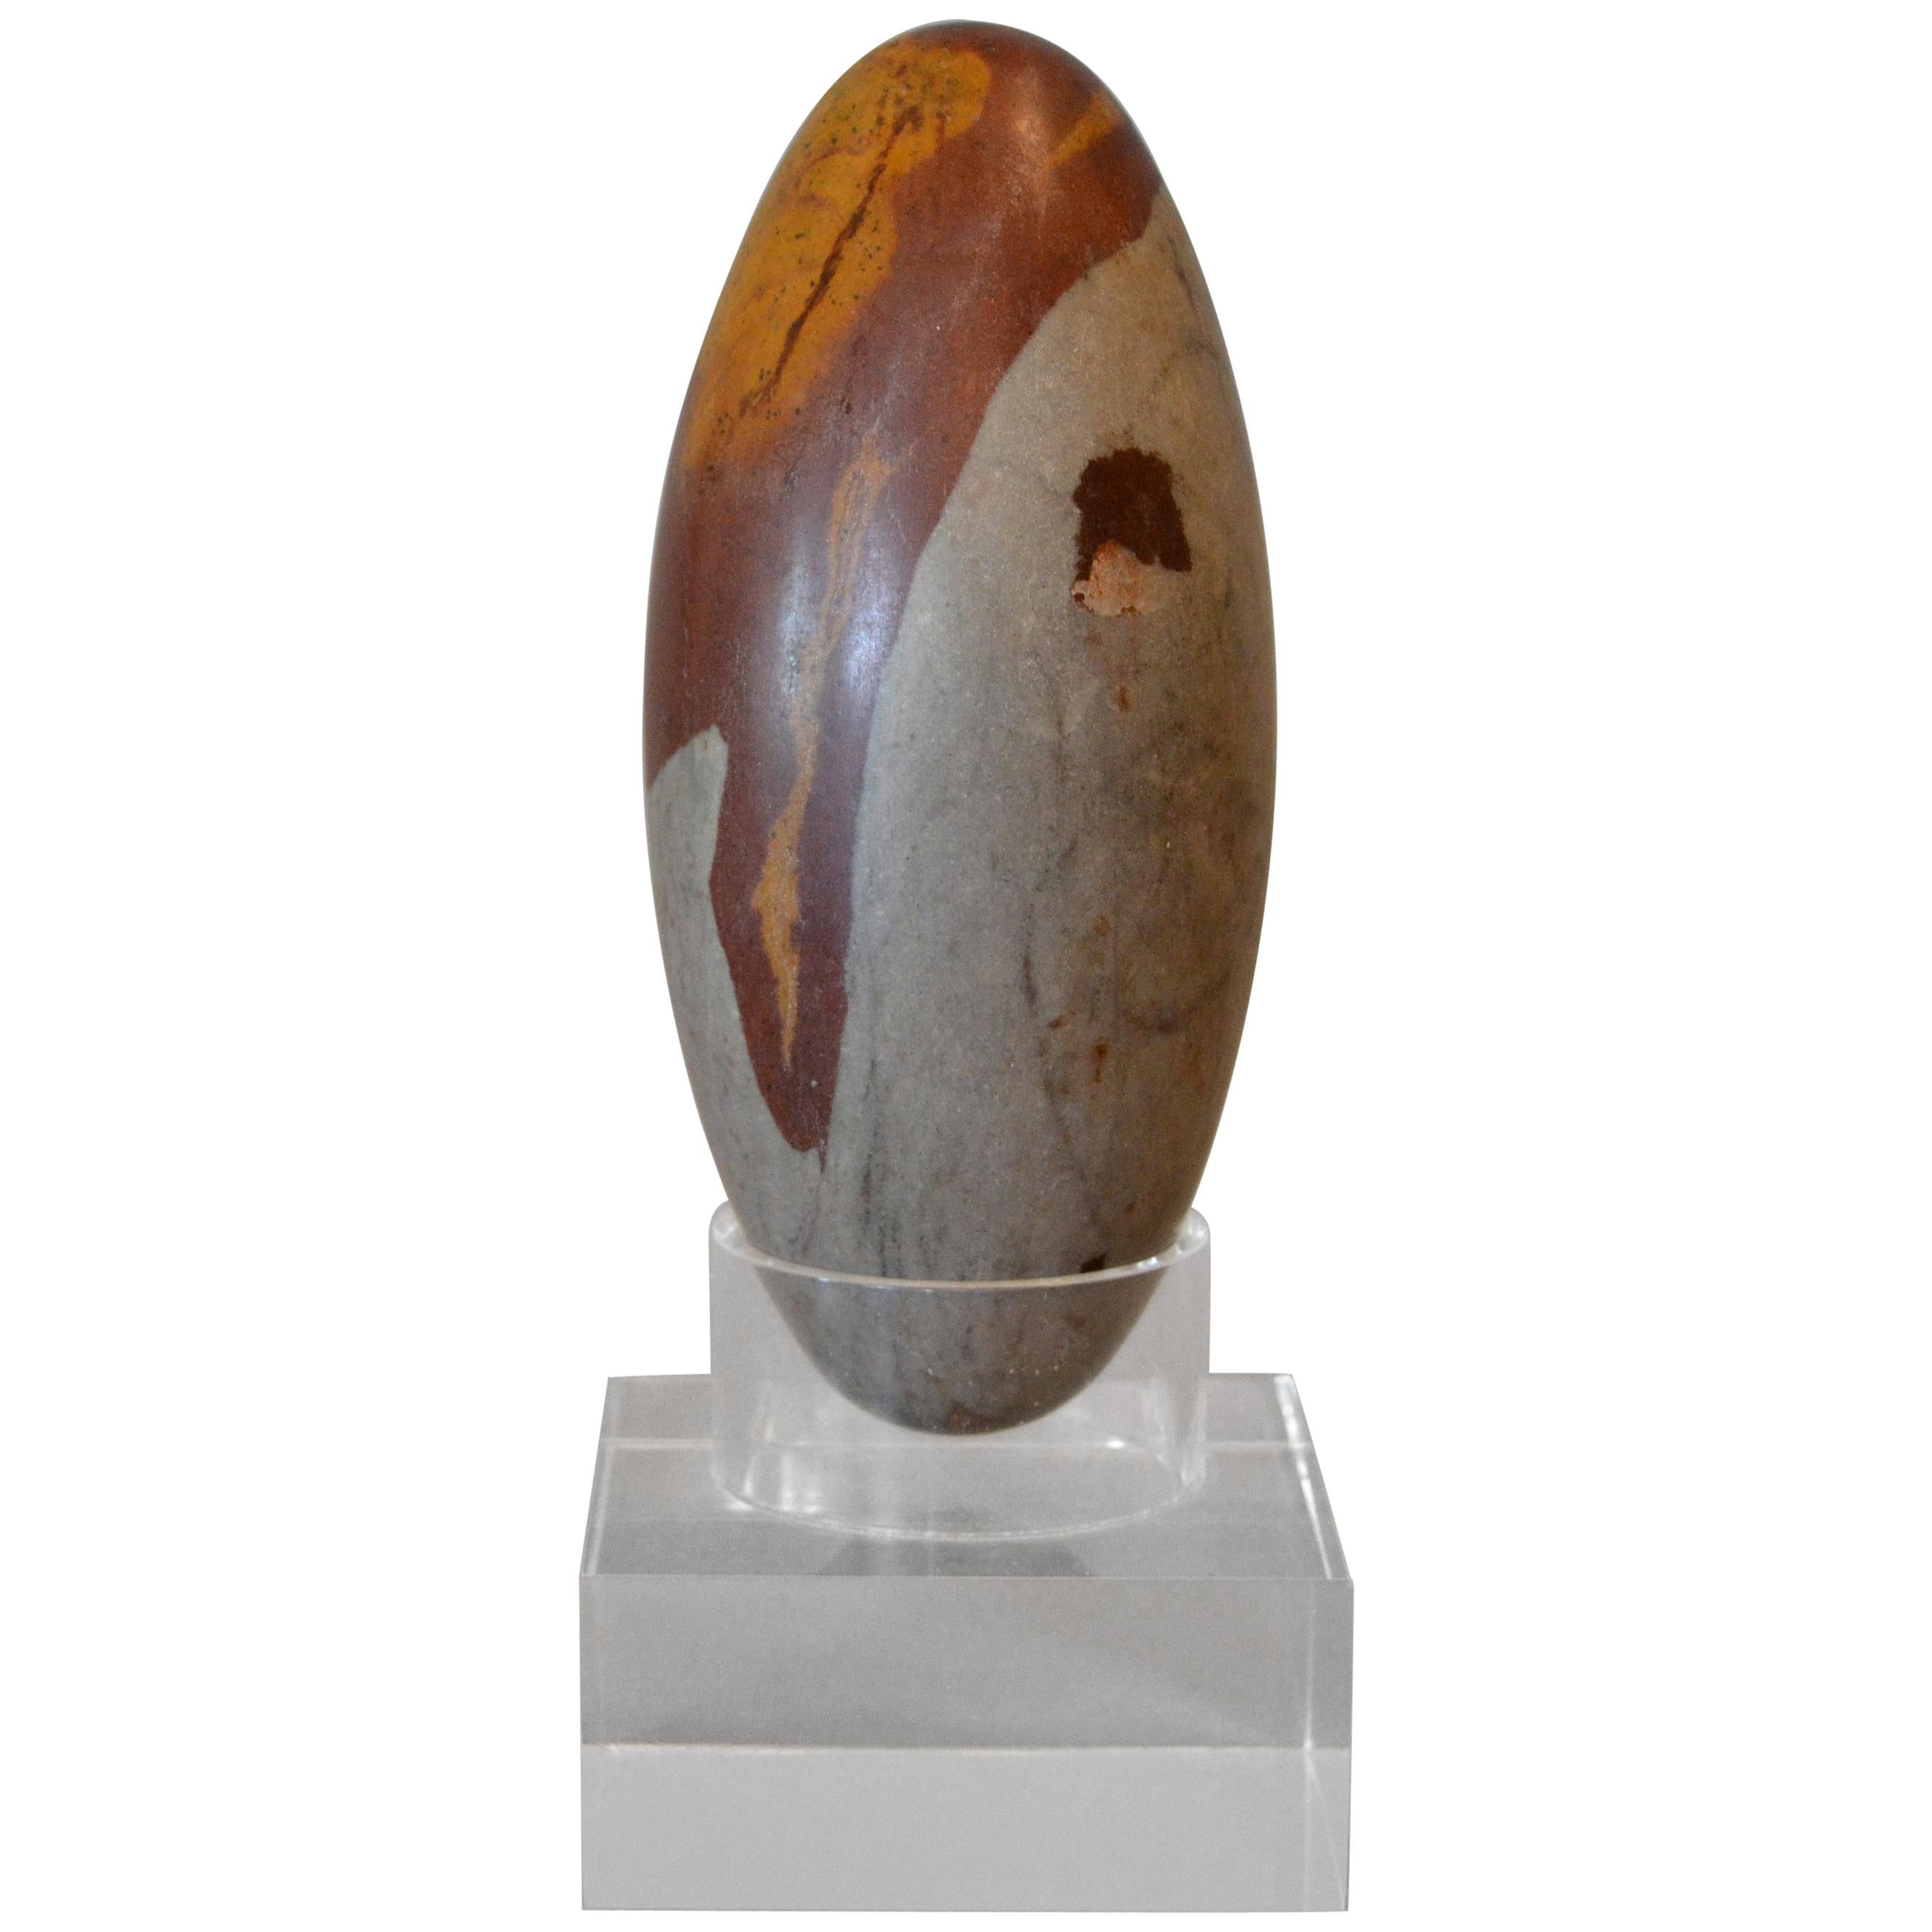 Antique Indian Tantric Shiva Lingam Stone on a Clear Lucite Stand